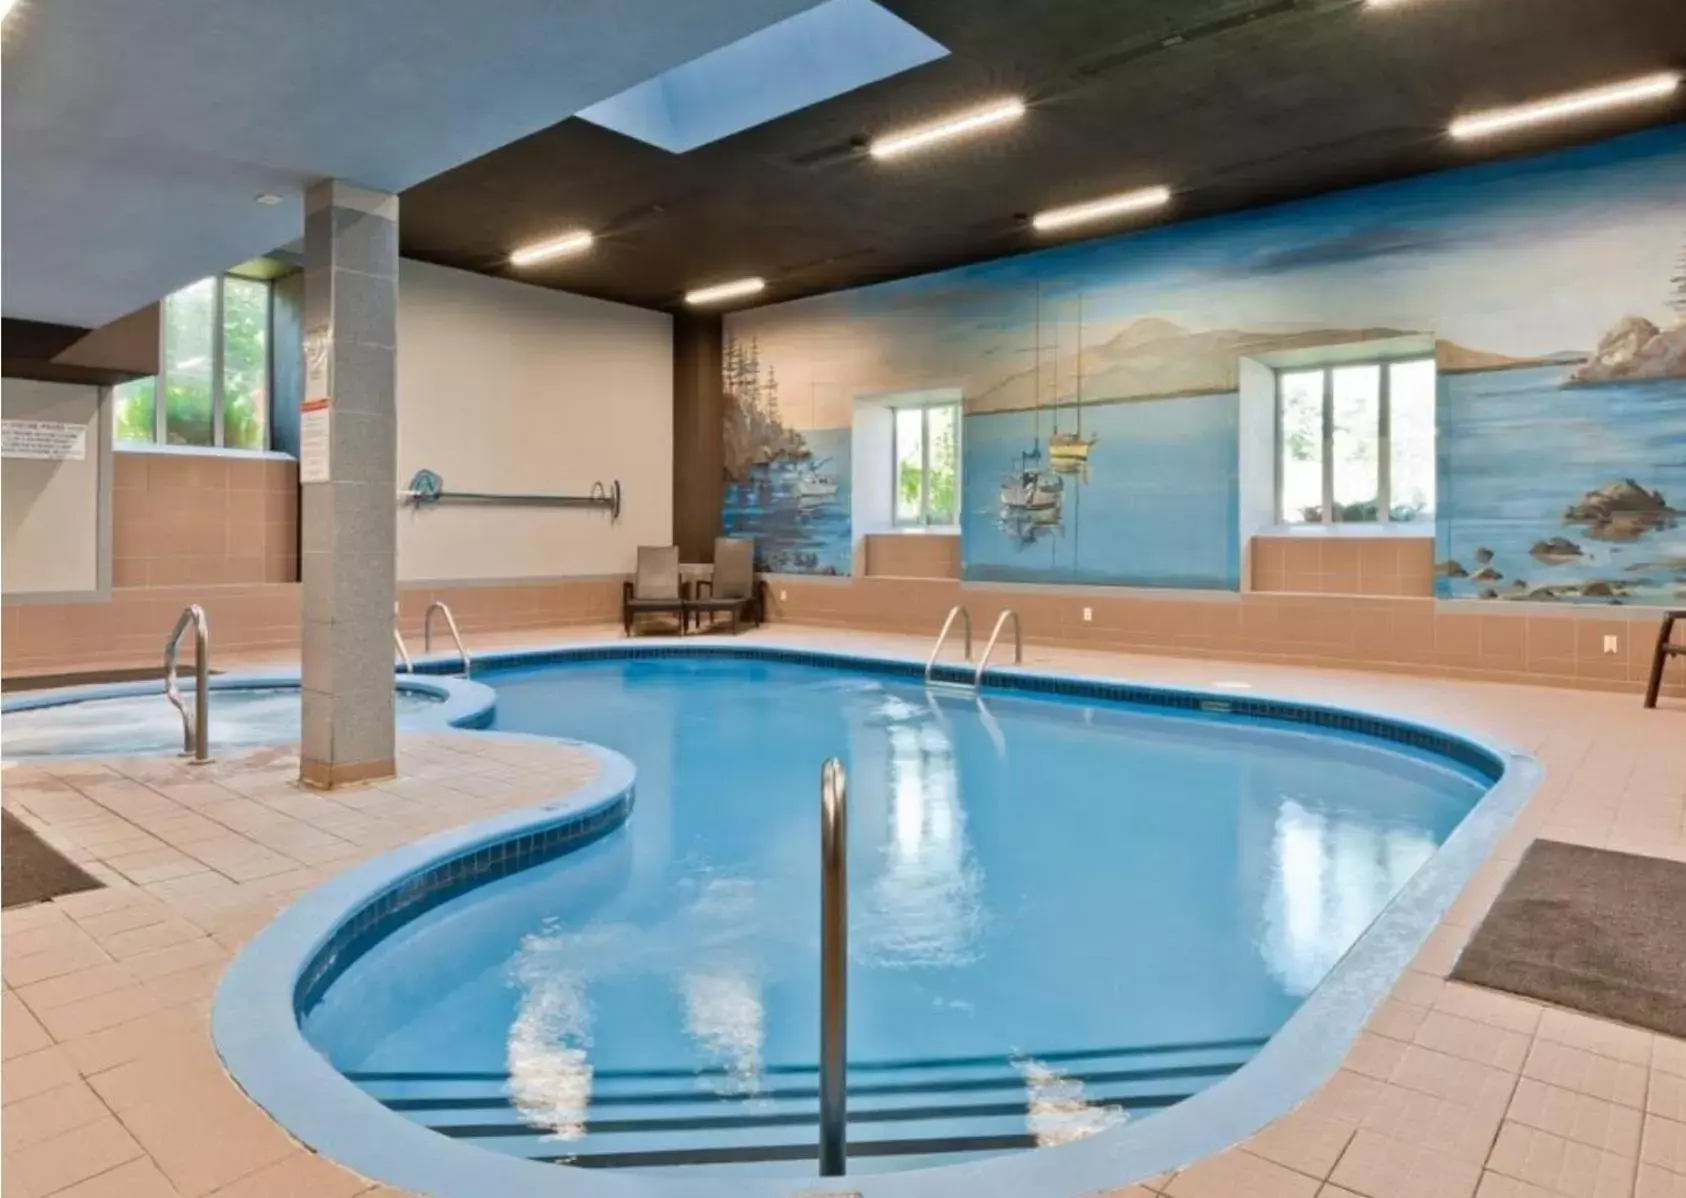 Hot Tub, Swimming Pool in Magog Waterfront Condo